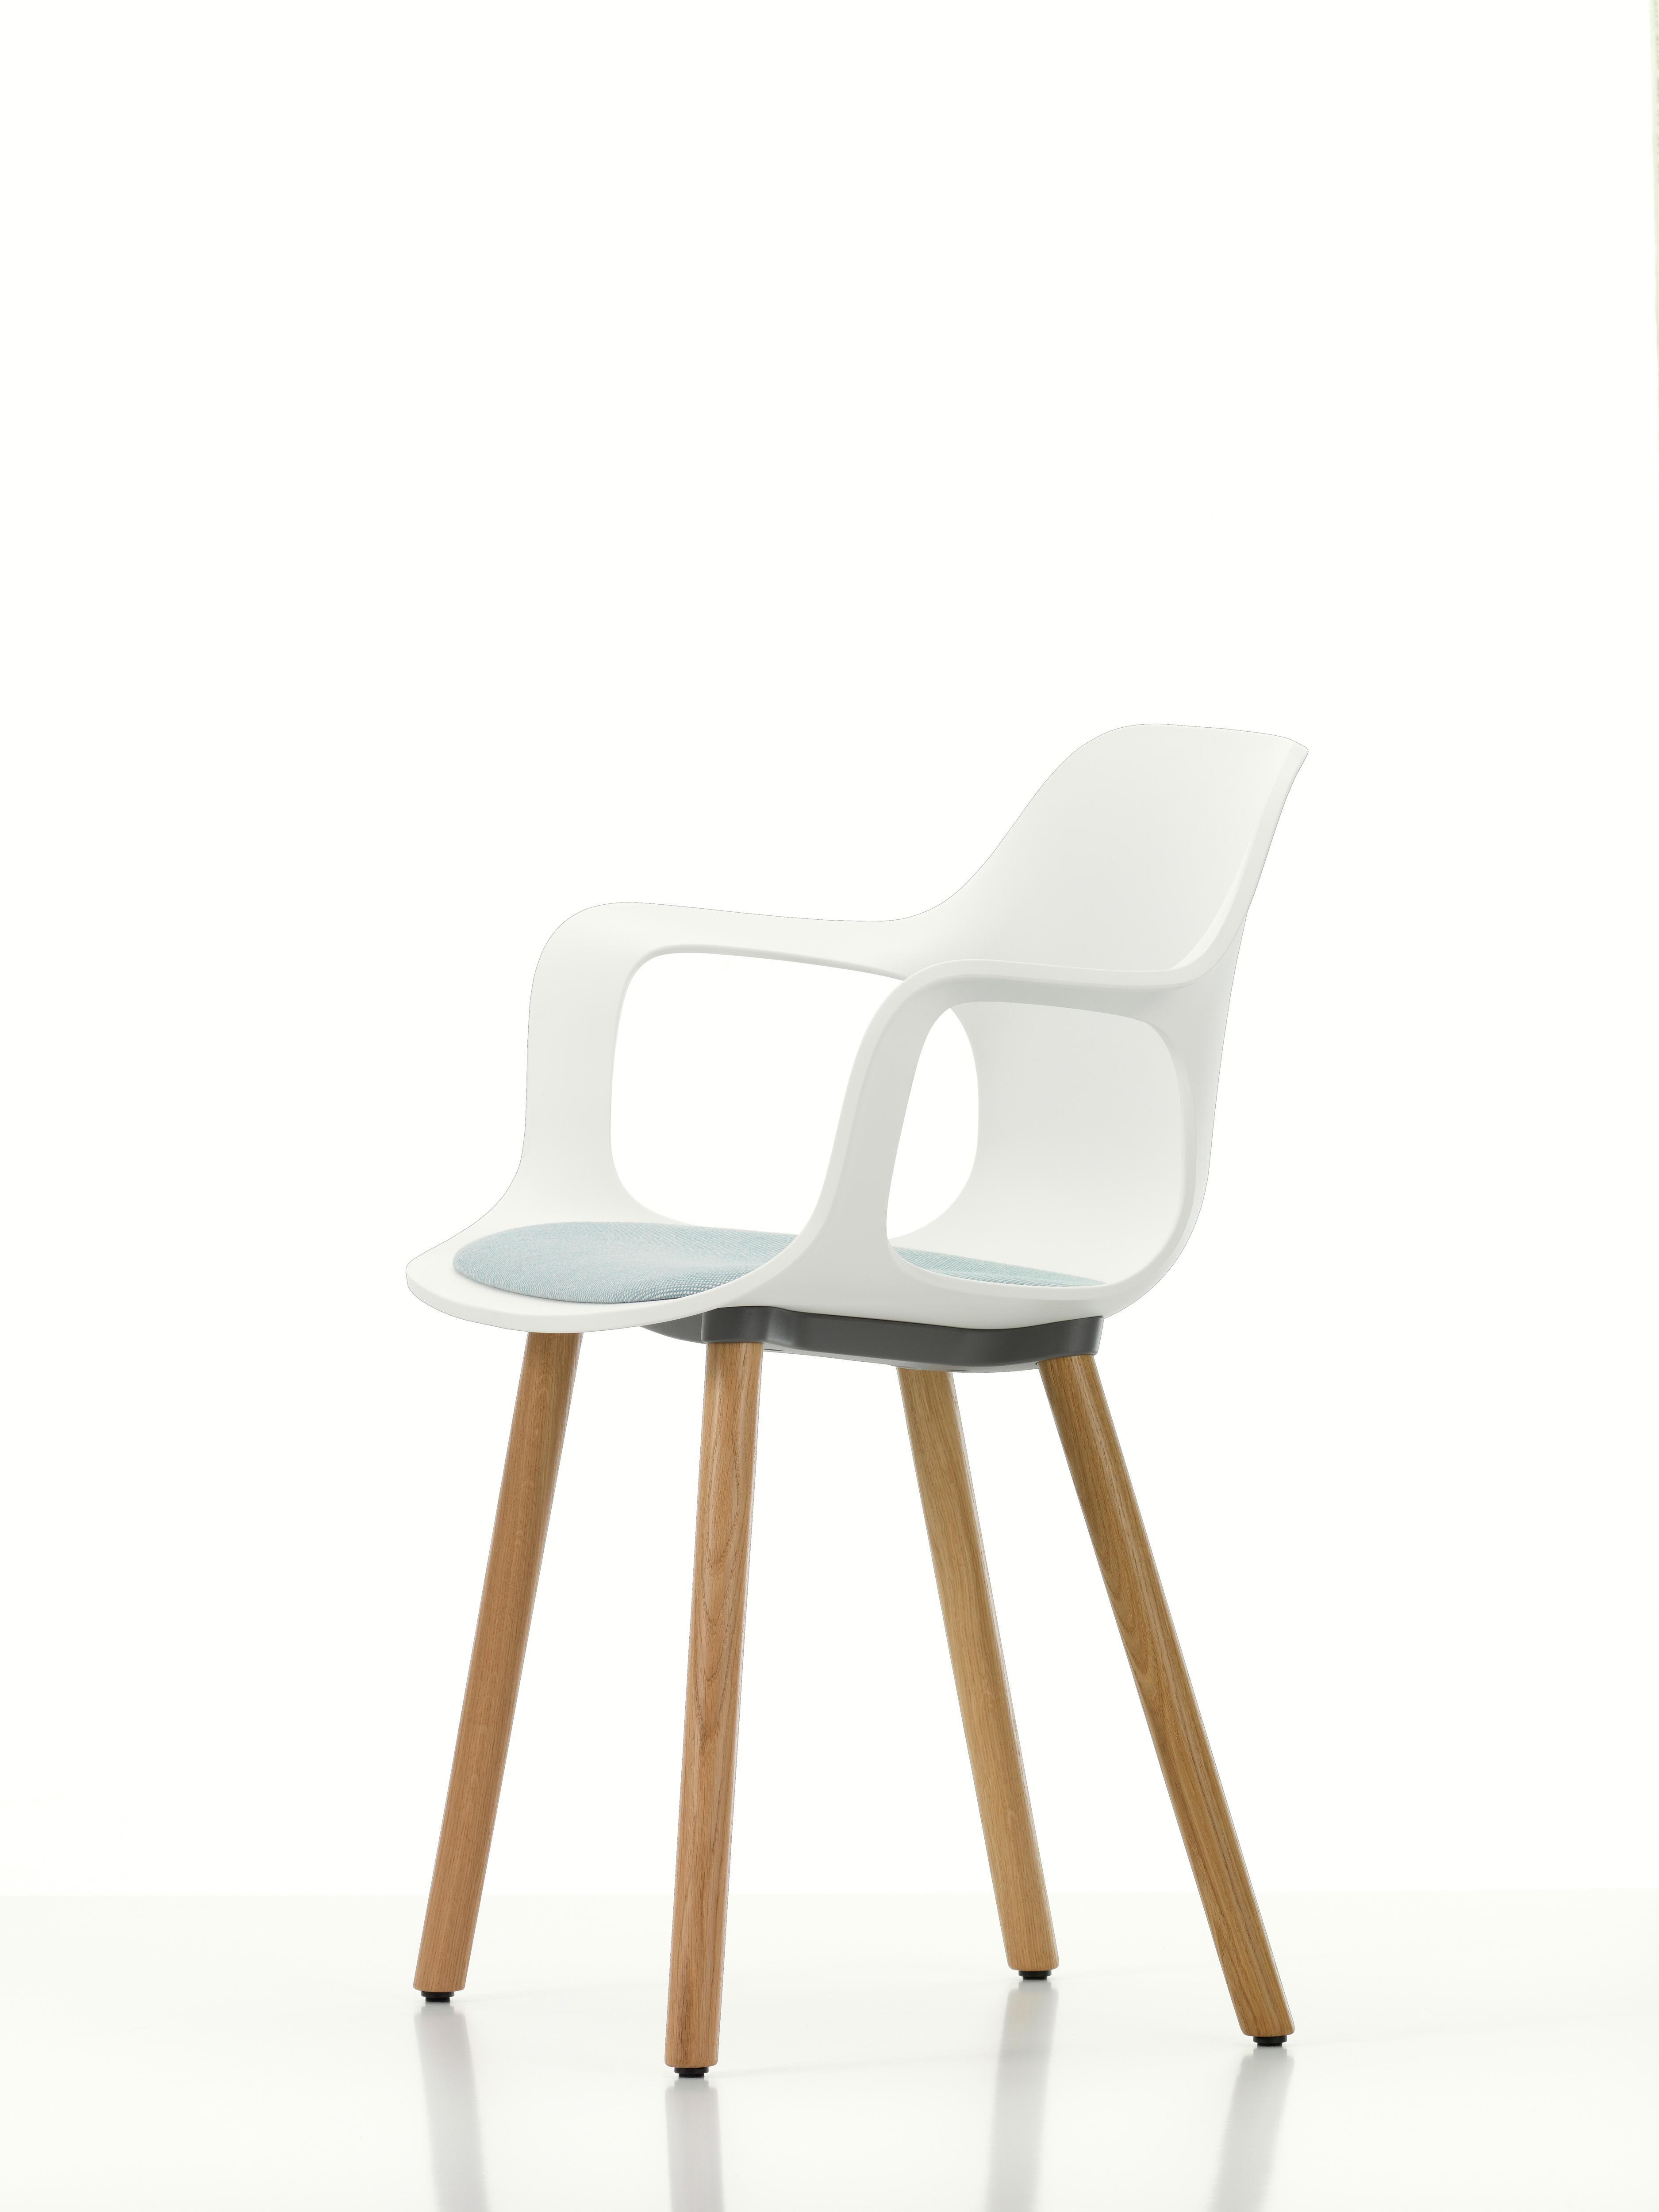 These products are only available in the United States.

Vitra HAL armchair wood with seat upholstery in white by Jasper Morrison.

Materials:
Seat shell: Dyed-through polypropylene, with seat cushion (screwed to the seat shell).
Base: Non-stackable